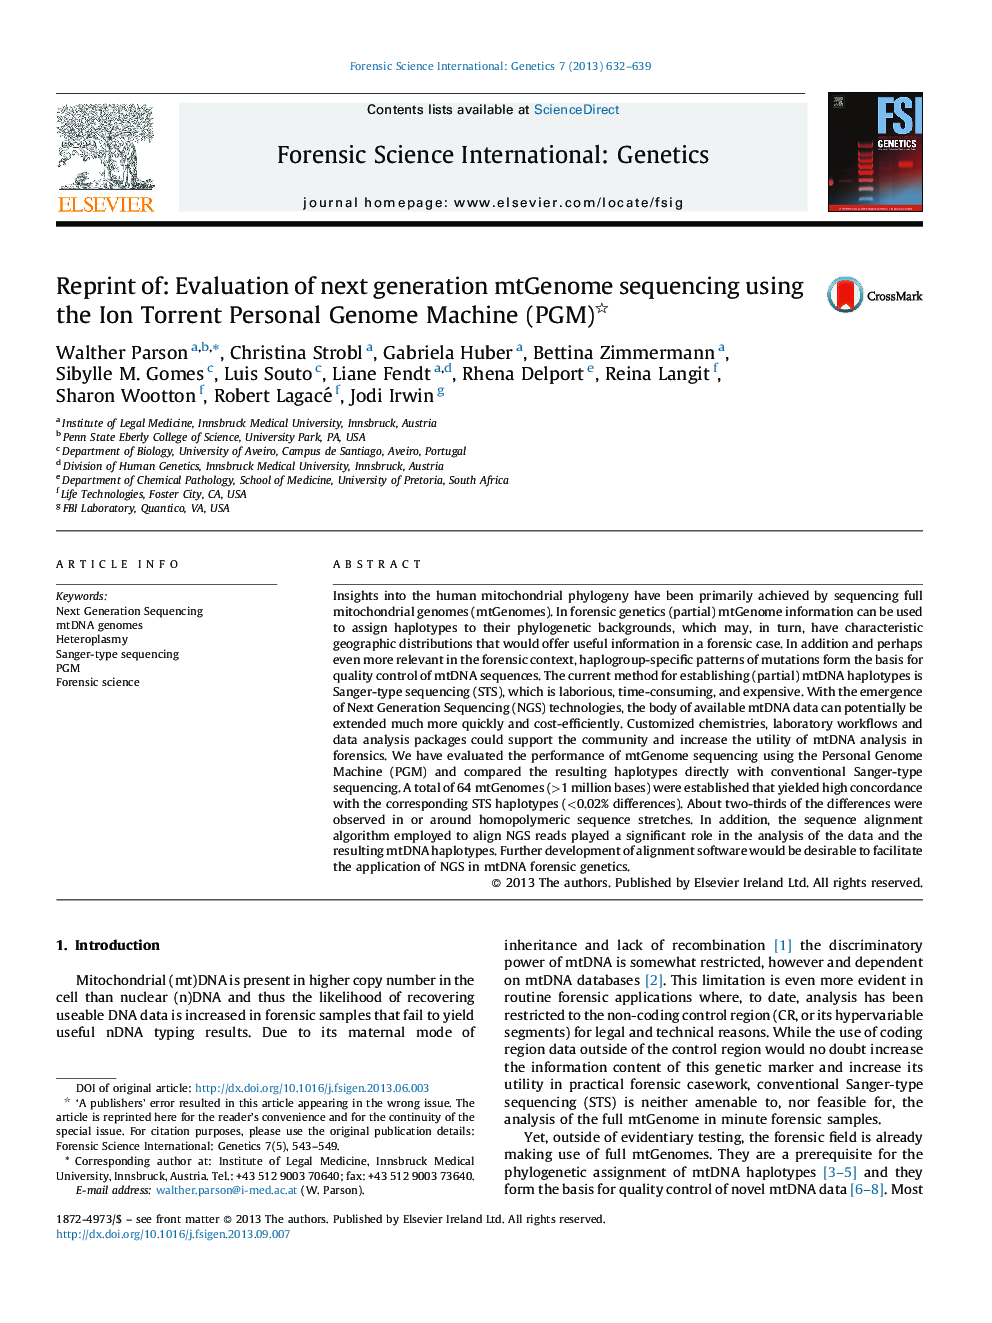 Reprint of: Evaluation of next generation mtGenome sequencing using the Ion Torrent Personal Genome Machine (PGM)